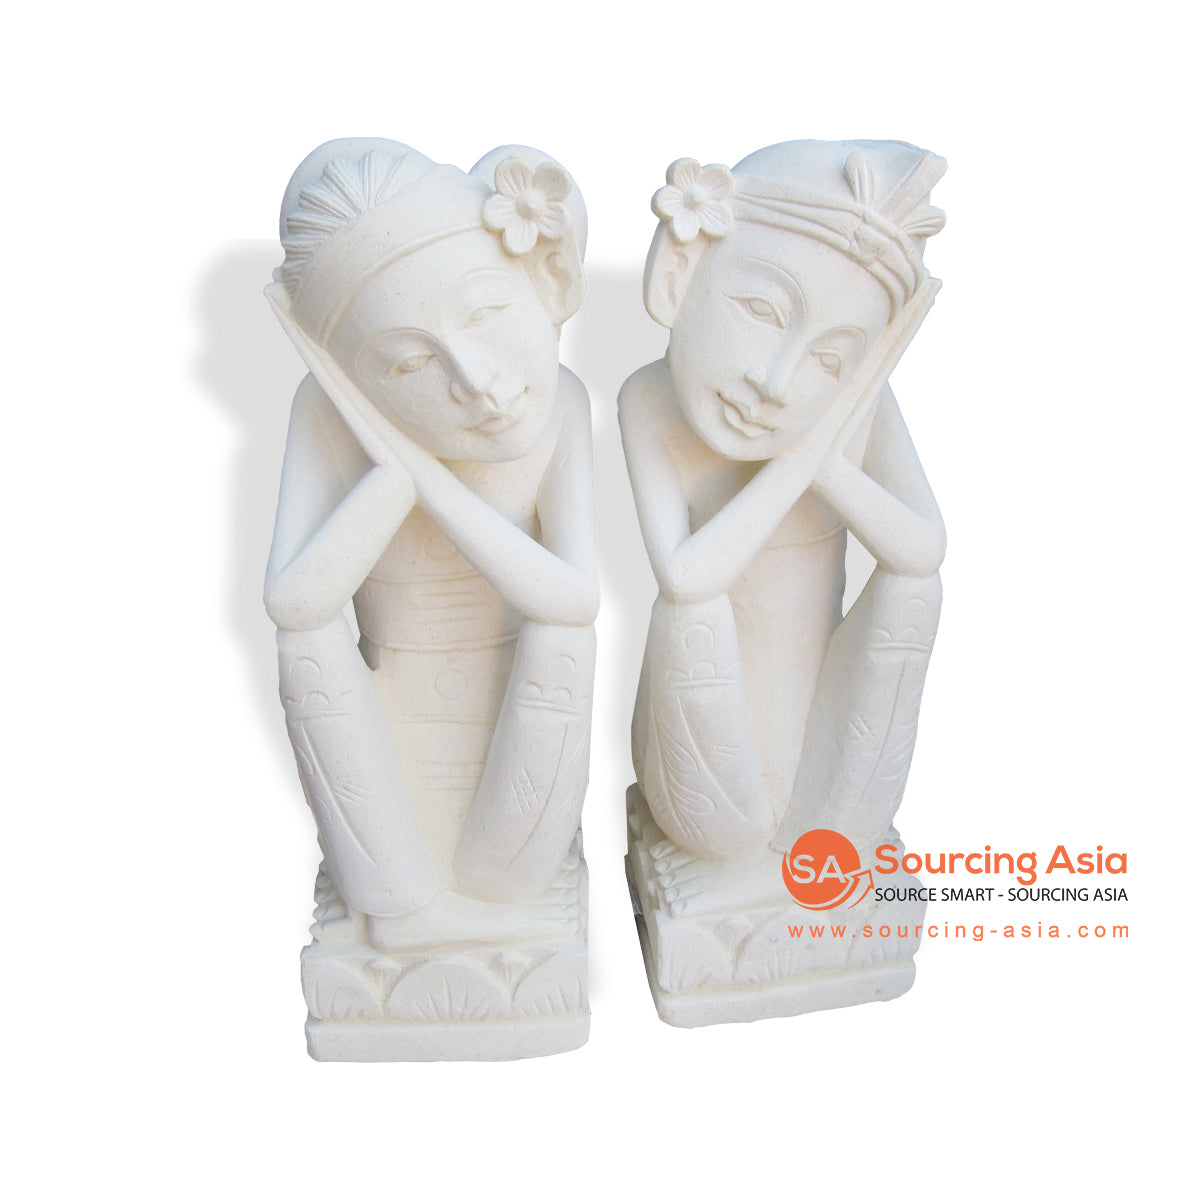 MHB057-60 STONE DREAMING BALINESE COUPLE STATUE